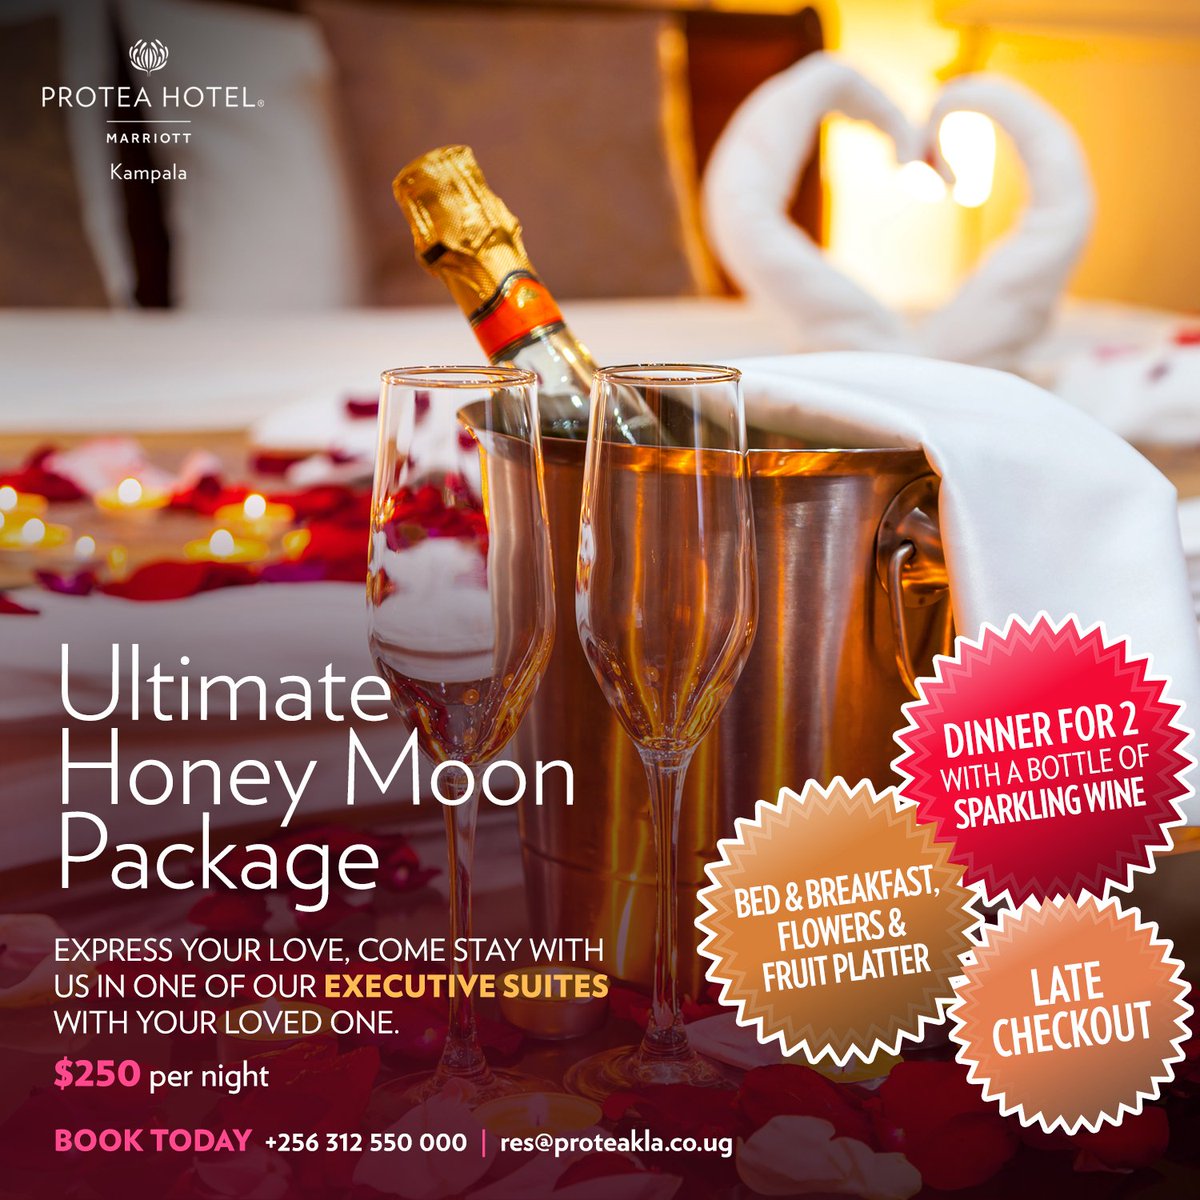 Express your love with a magical honeymoon stay at #ProteaKampala. Book an executive suite at $250 per night

Enjoy;
- Dinner for 2 with sparkling wine
- Bed & breakfast with flowers & a fruit platter

For more information, call 0312550000

#HoneymoonPackage #MarriottHotels